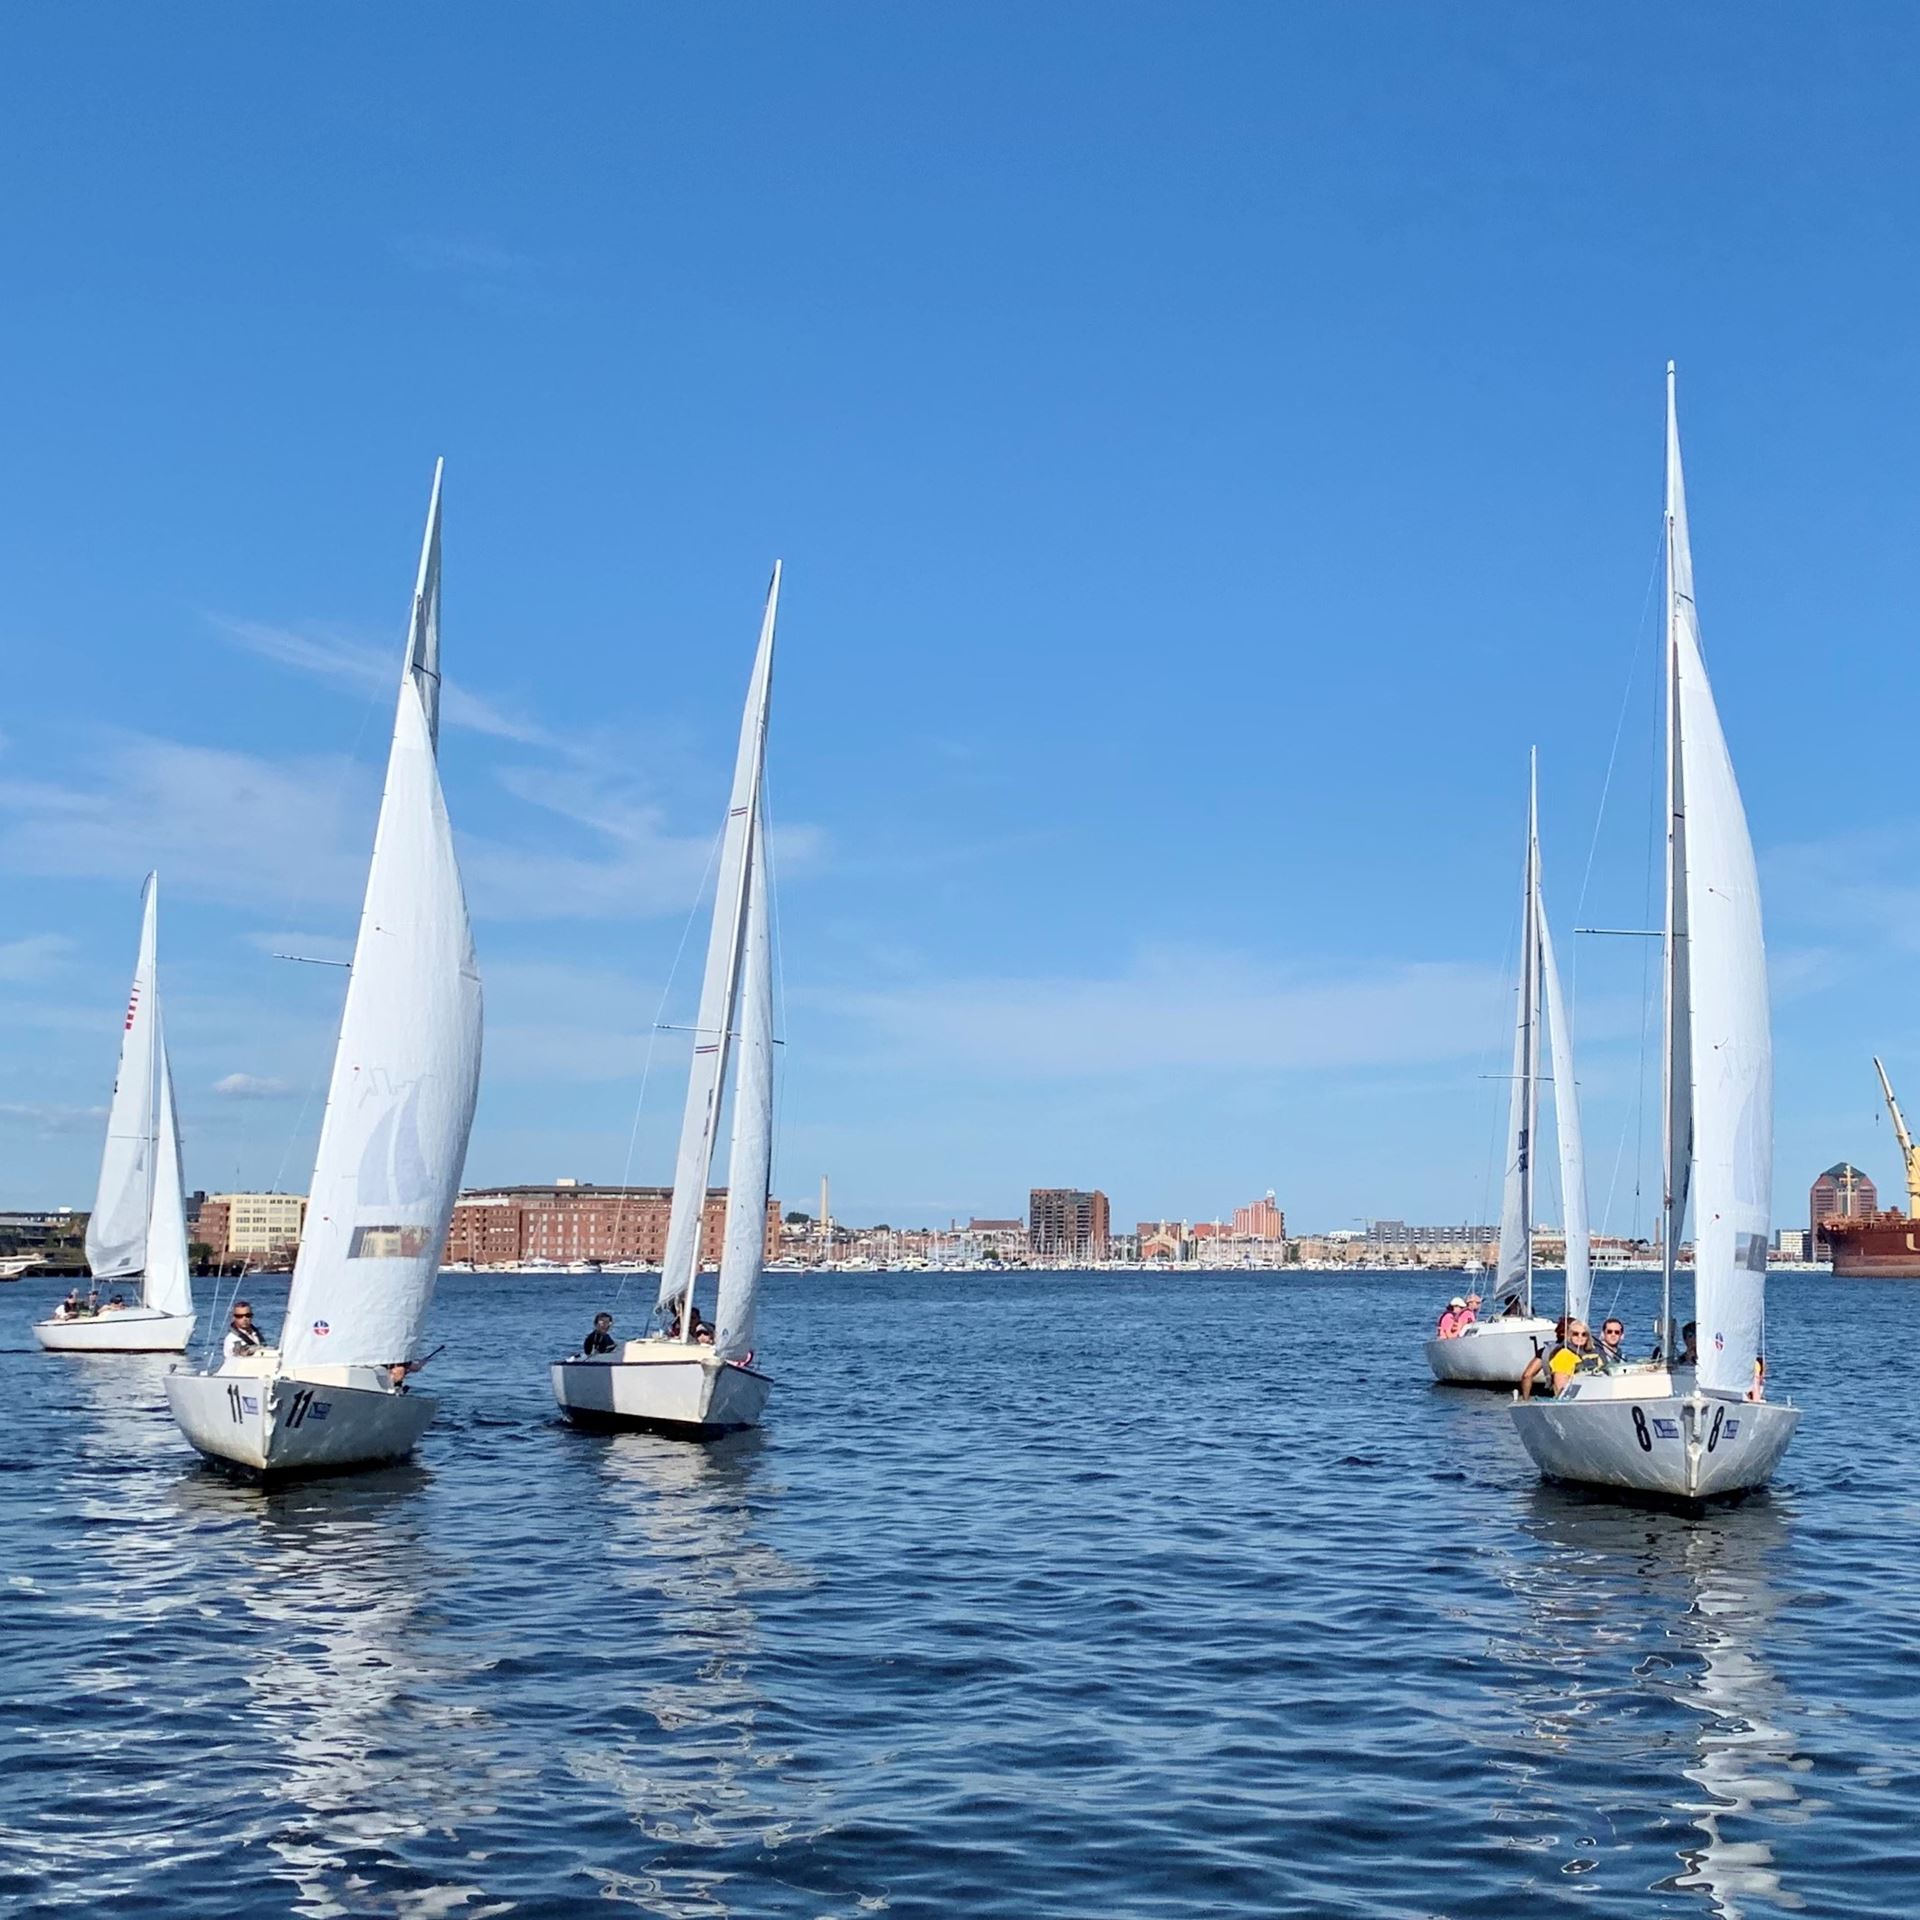 J22s and Sonars sail on a bluebird afternoon